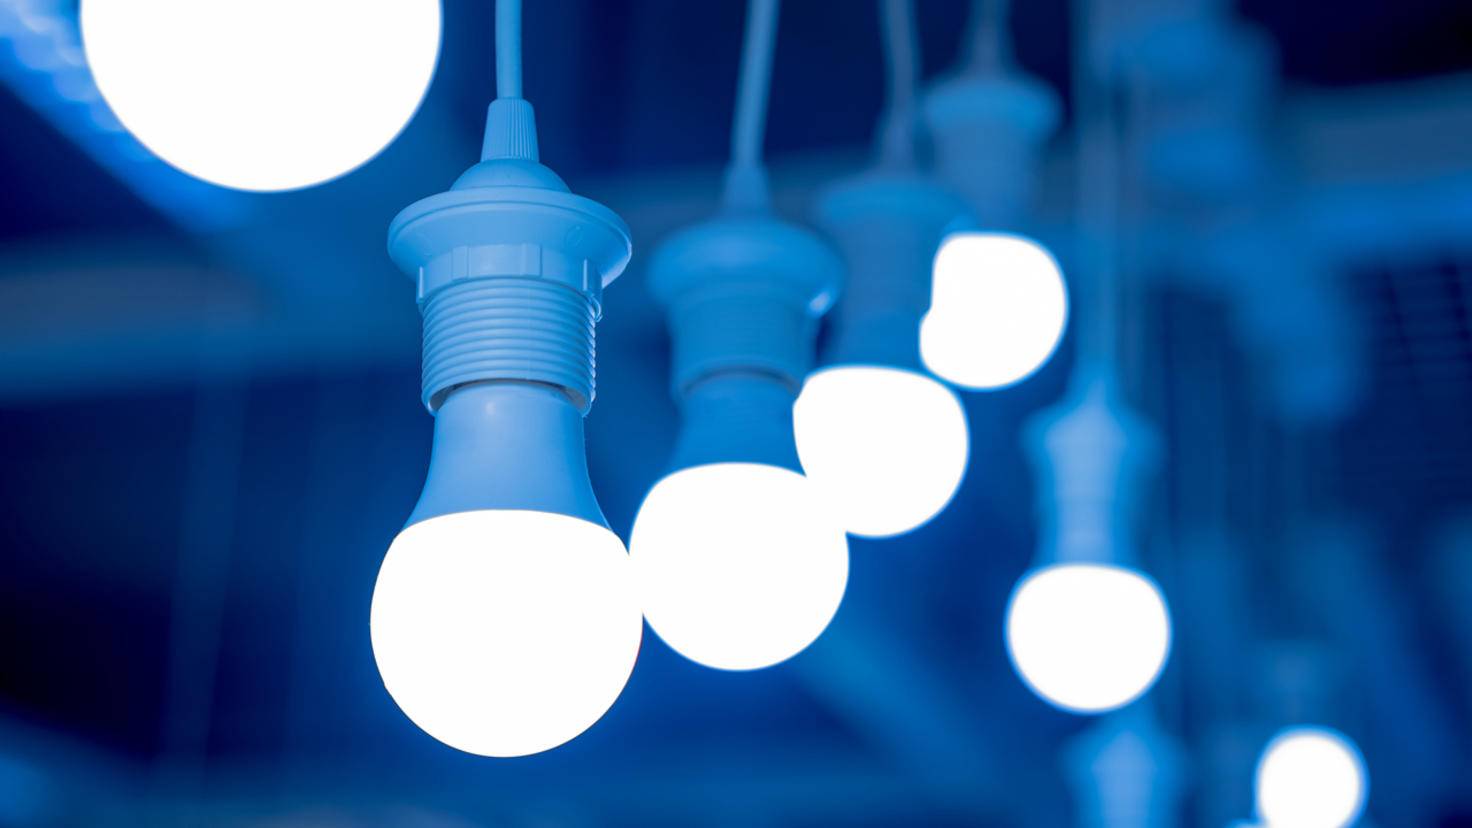 LED lamps literally overshadow conventional light bulbs.